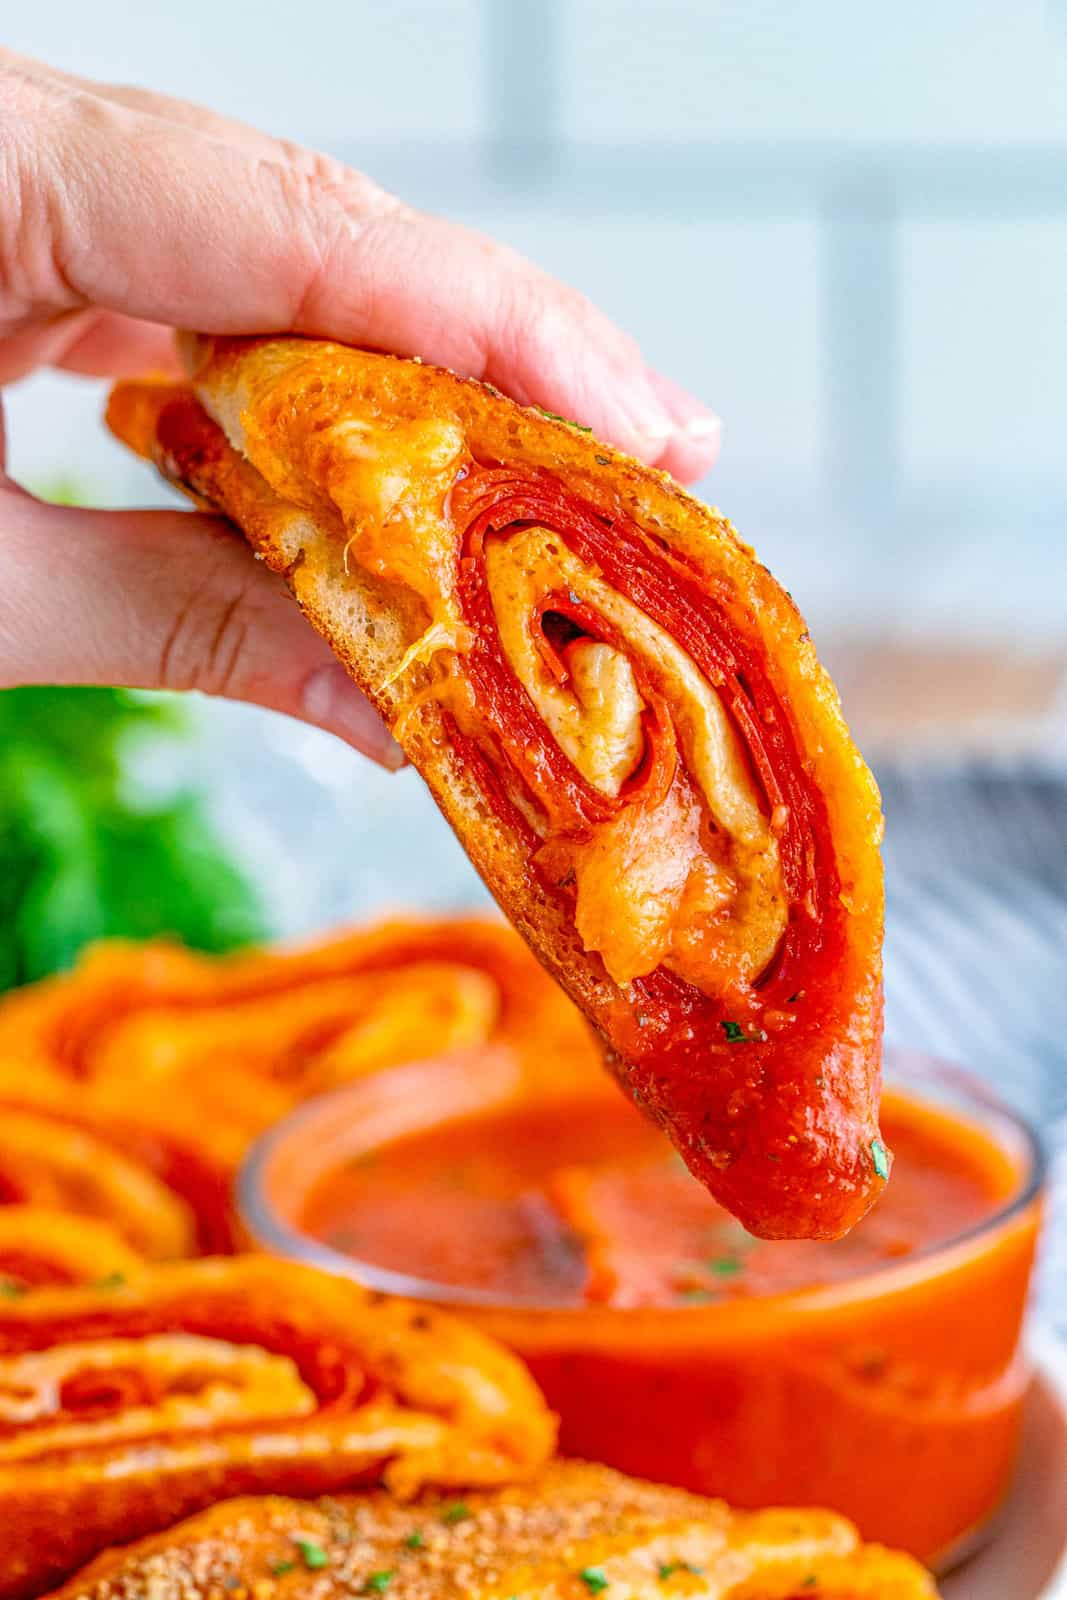 Hand holding up slice of Pepperoni Stromboli showing it dipped in pizza sauce.